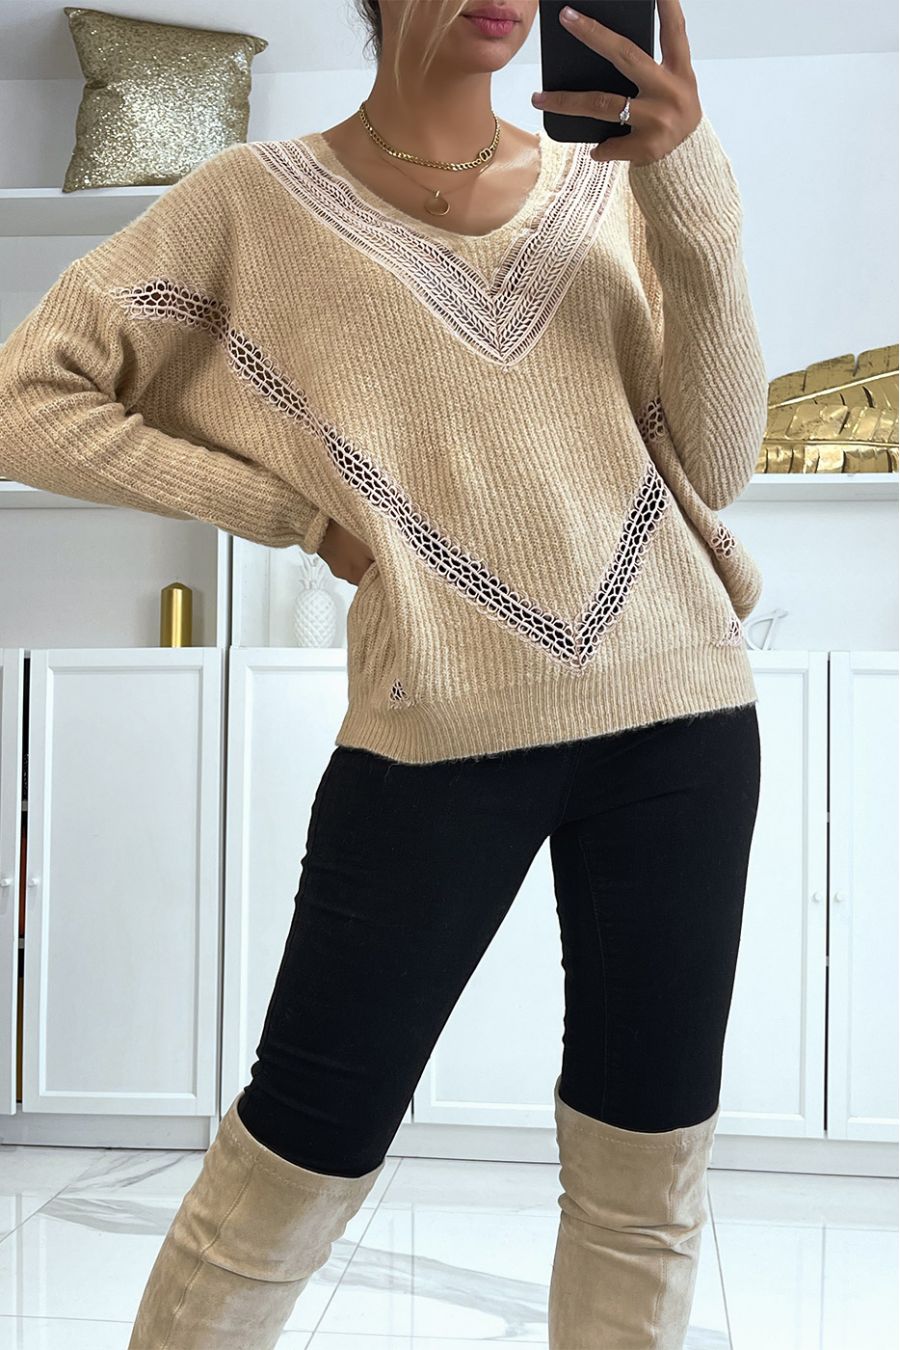 V-neck sweater with shiny checkered pattern